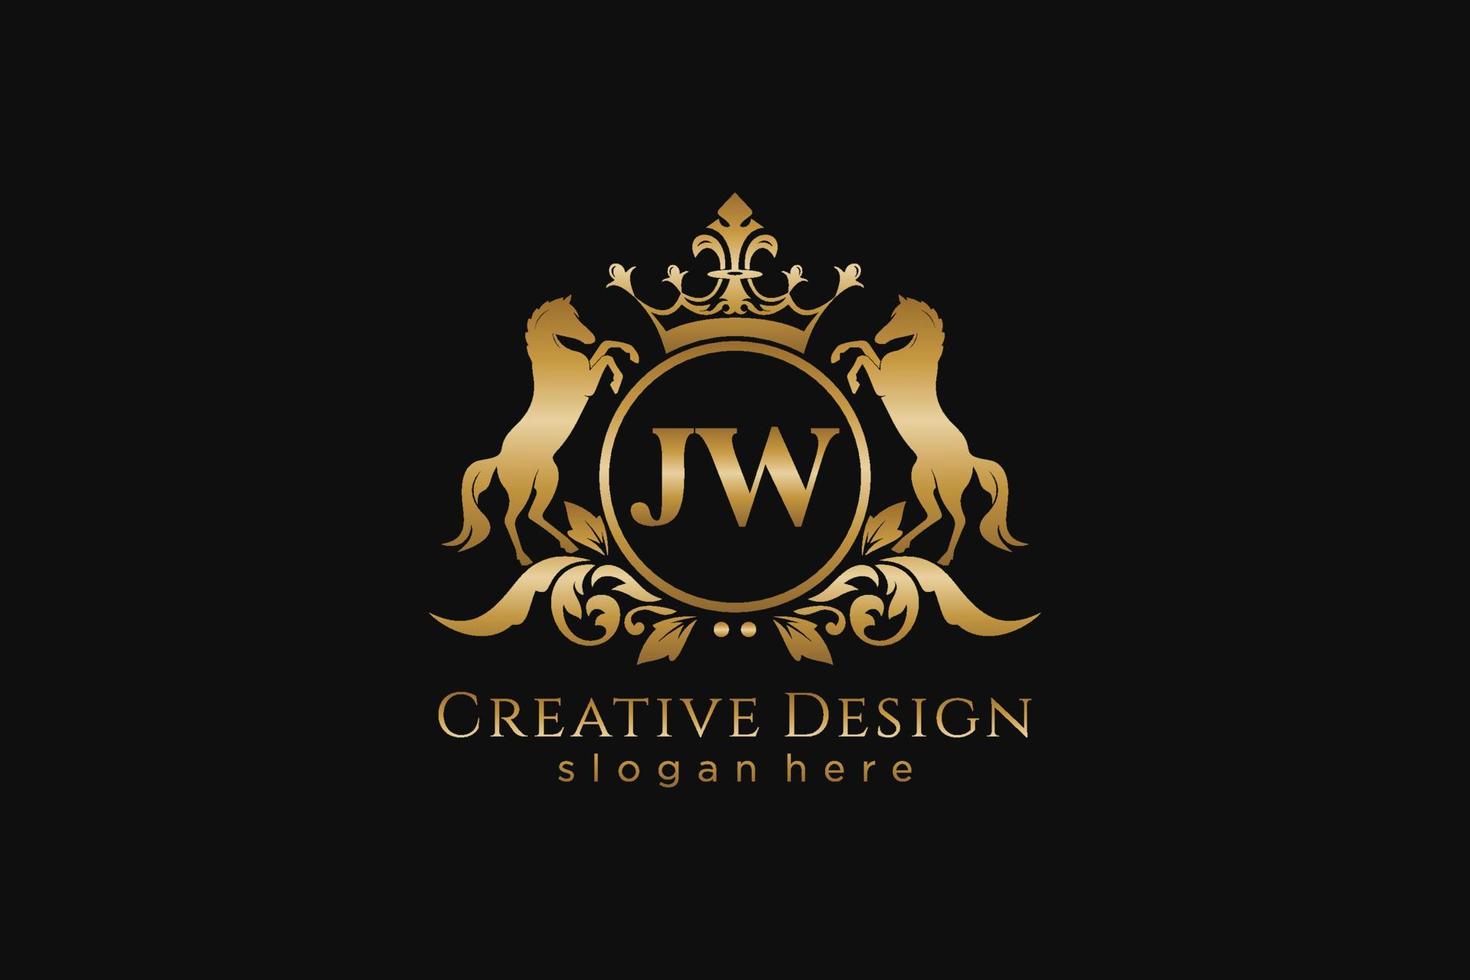 initial JW Retro golden crest with circle and two horses, badge template with scrolls and royal crown - perfect for luxurious branding projects vector